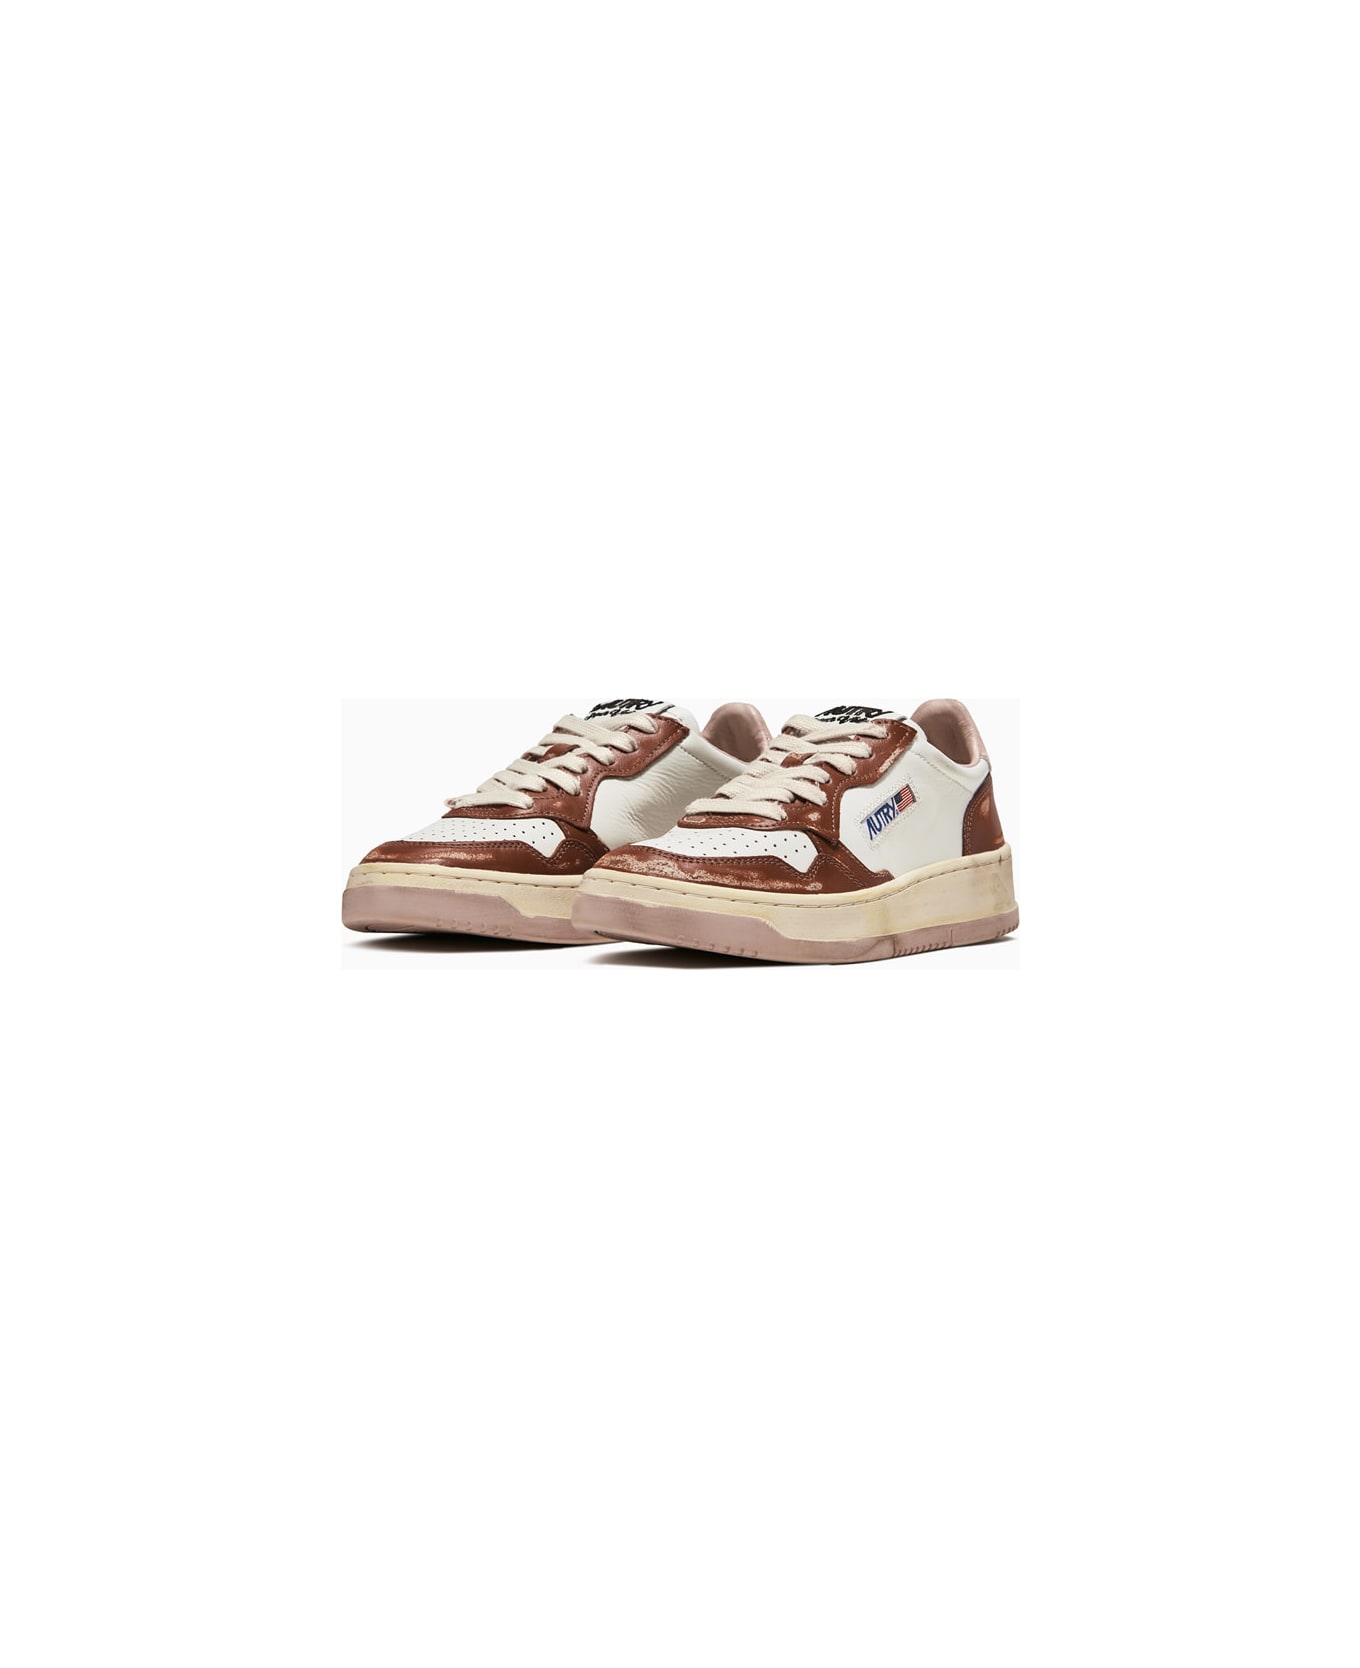 Autry Super Vintage Low Sneakers Avlw Cl01 - WHITE/Brown スニーカー